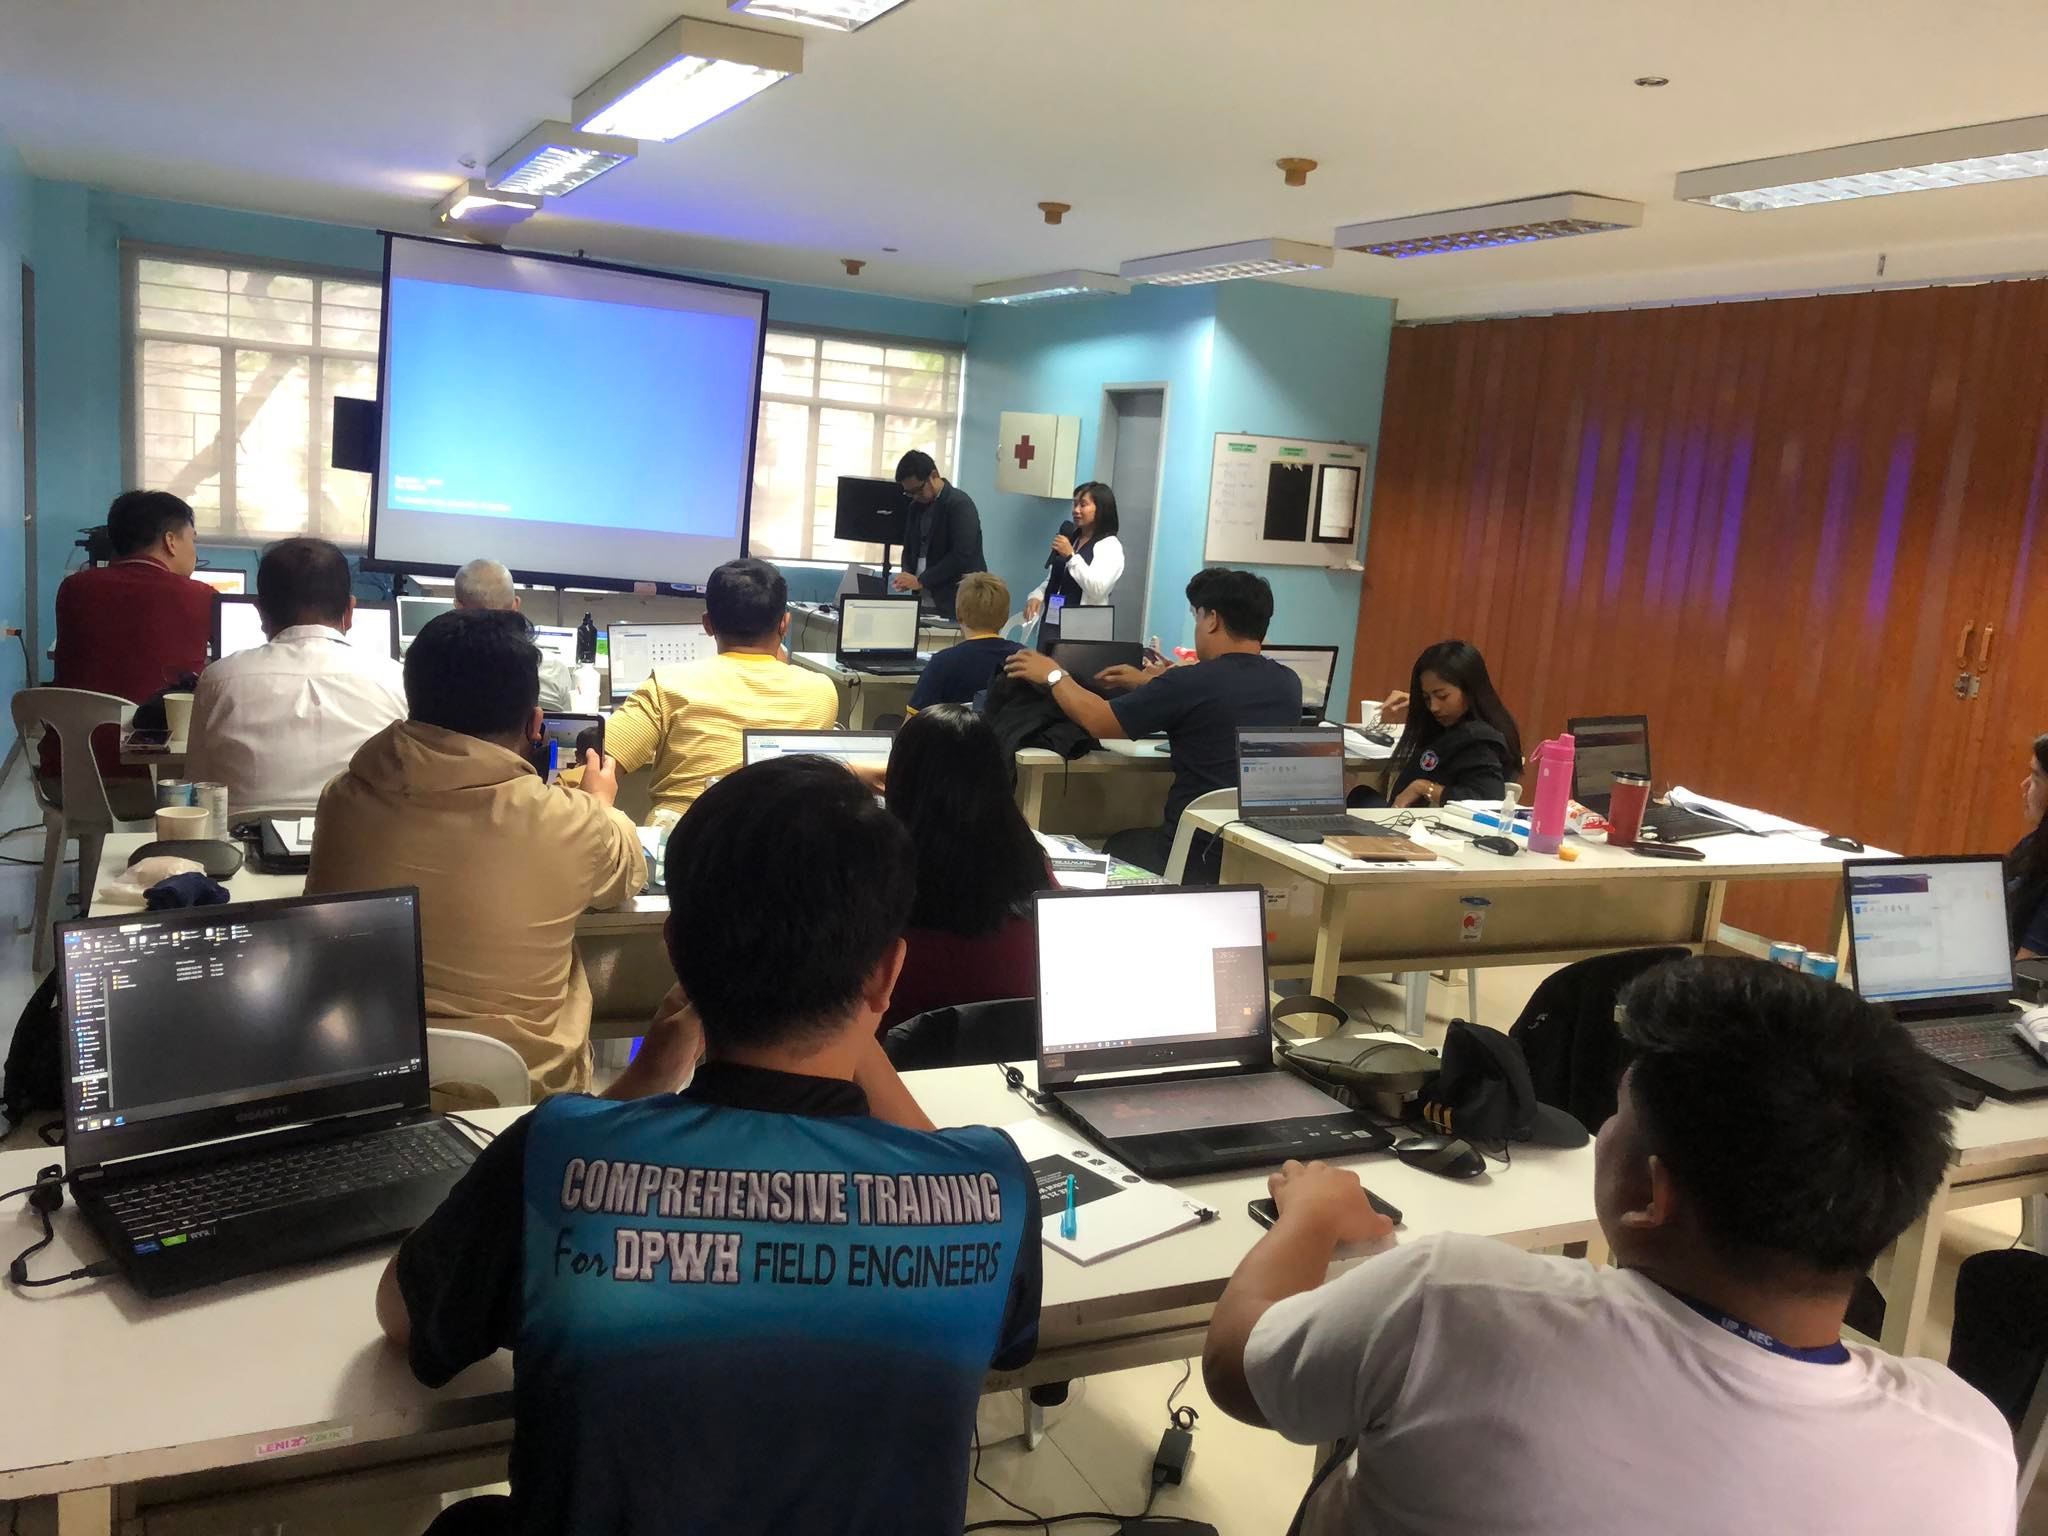 MIKE 21 Training with DPWH started